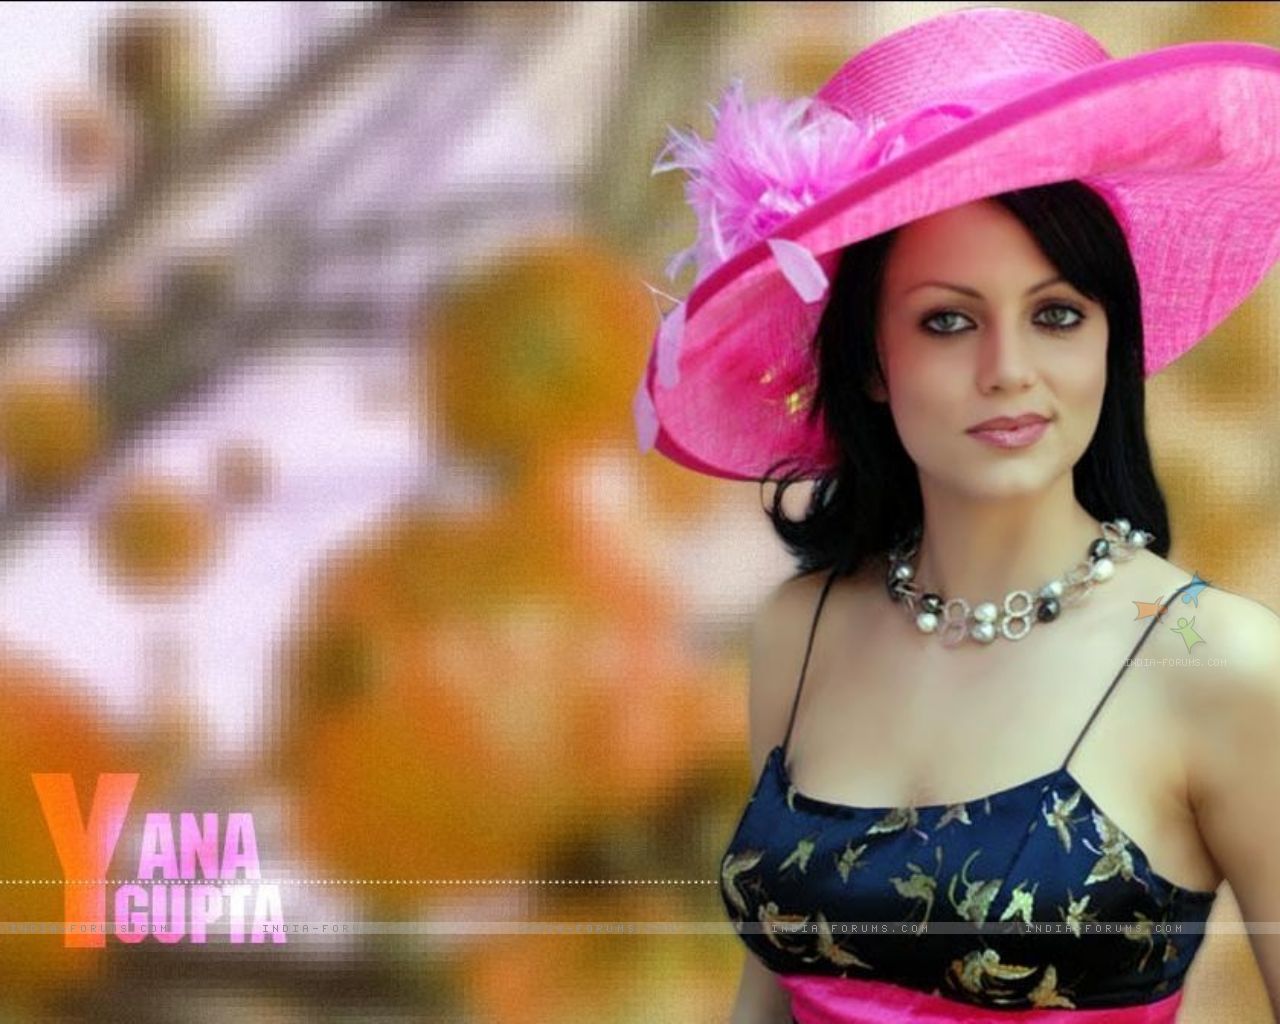 Yana Gupta Hot Wallpapers Pack 1 All Entry Wallpapers